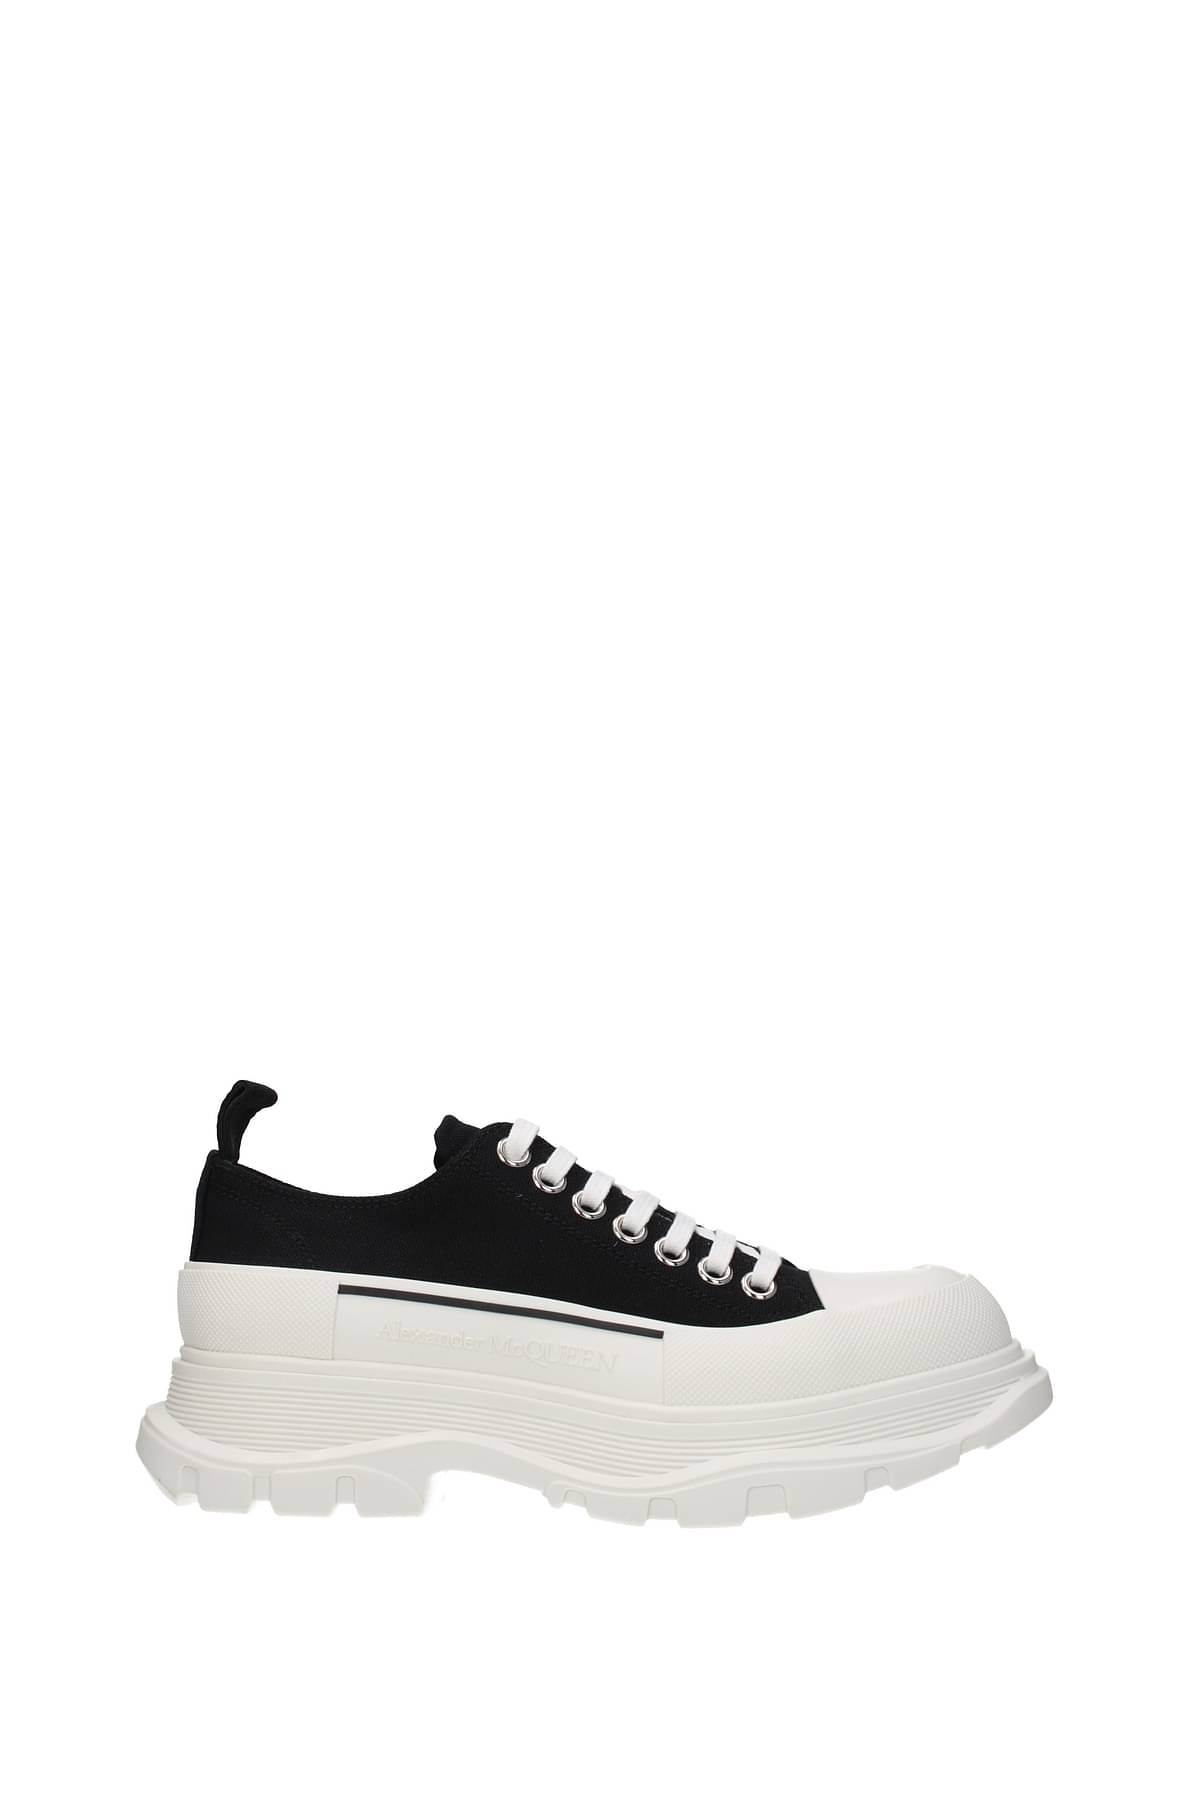 alexander mcqueen sneakers mens black and white - OFF-59% >Free Delivery